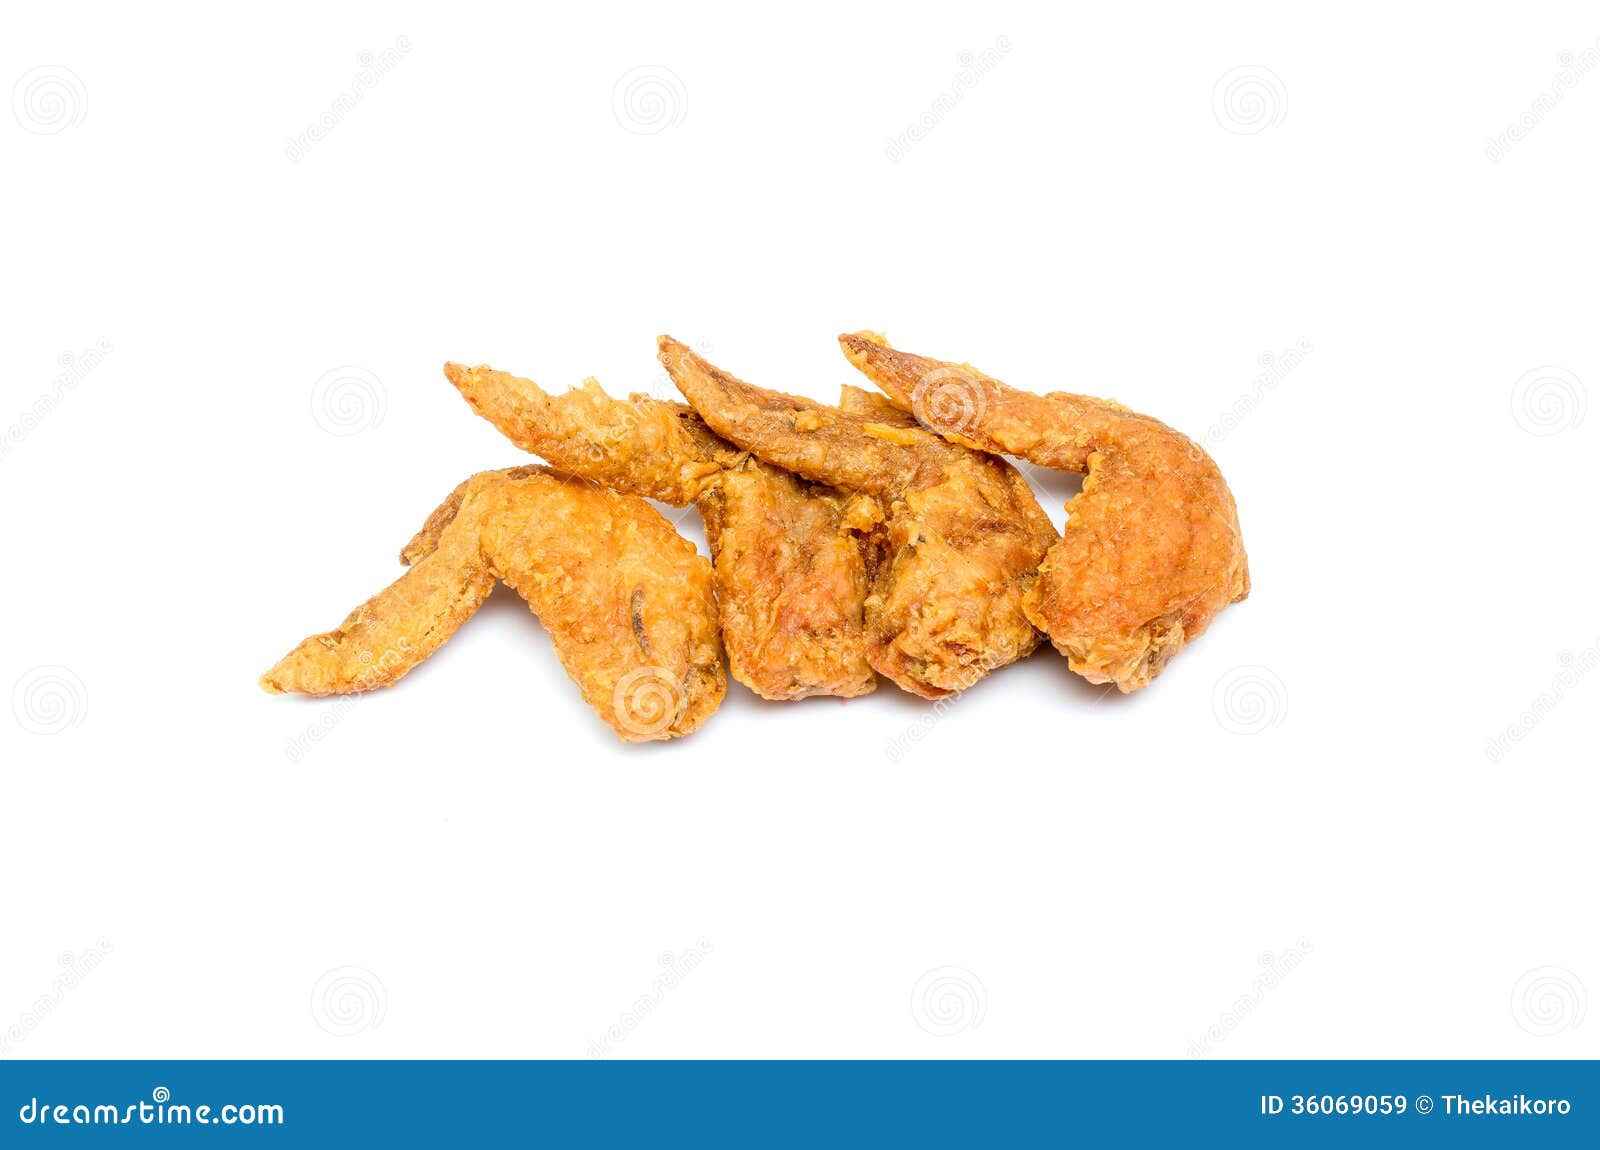 clipart fried chicken wings - photo #19